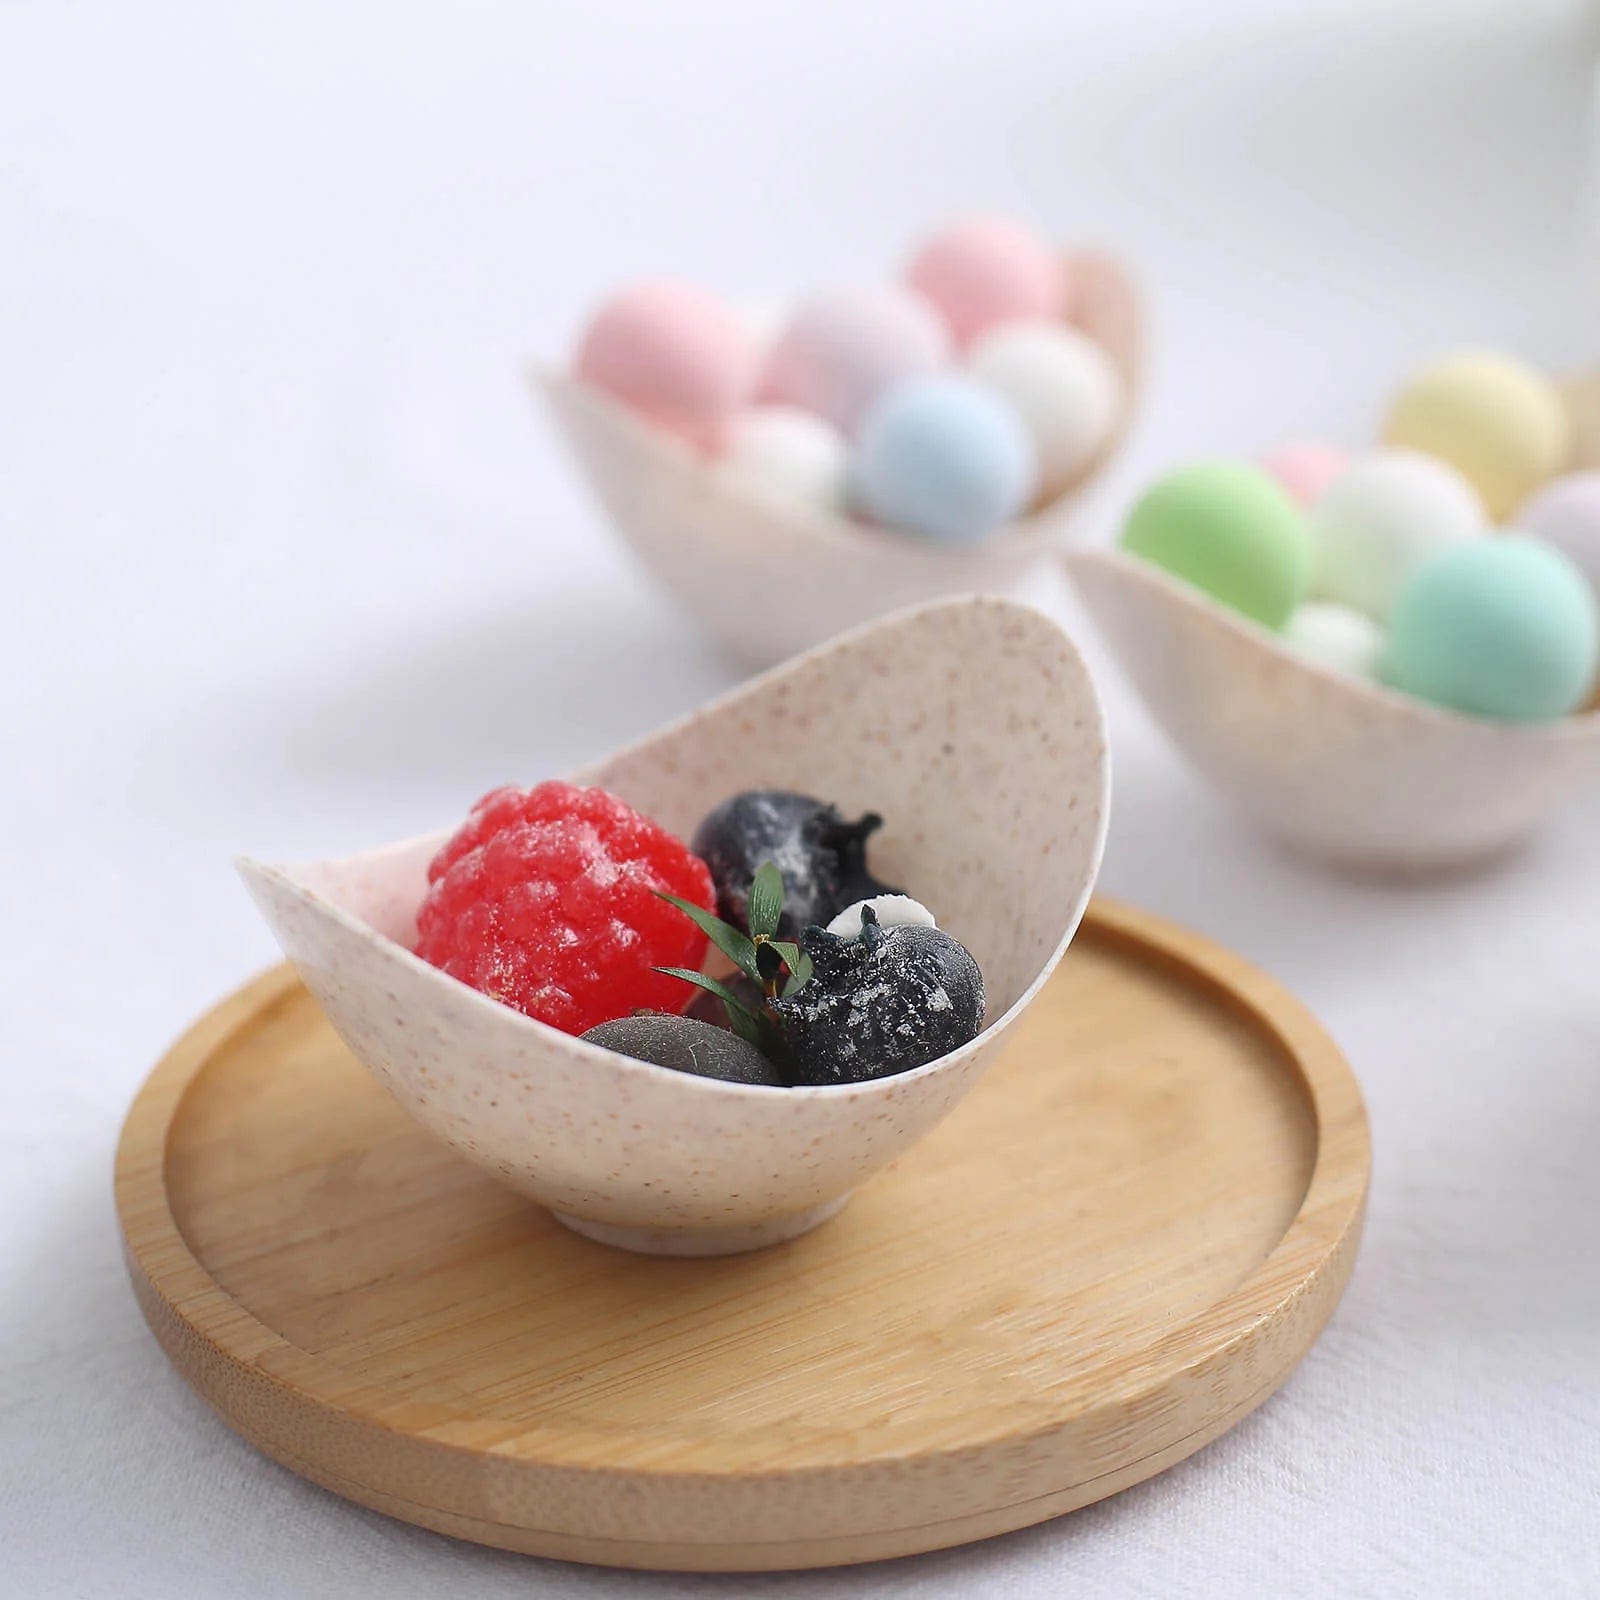 24 Natural 3 in Wheat Straw Fiber Mini Bowls Sustainable Dessert Cups